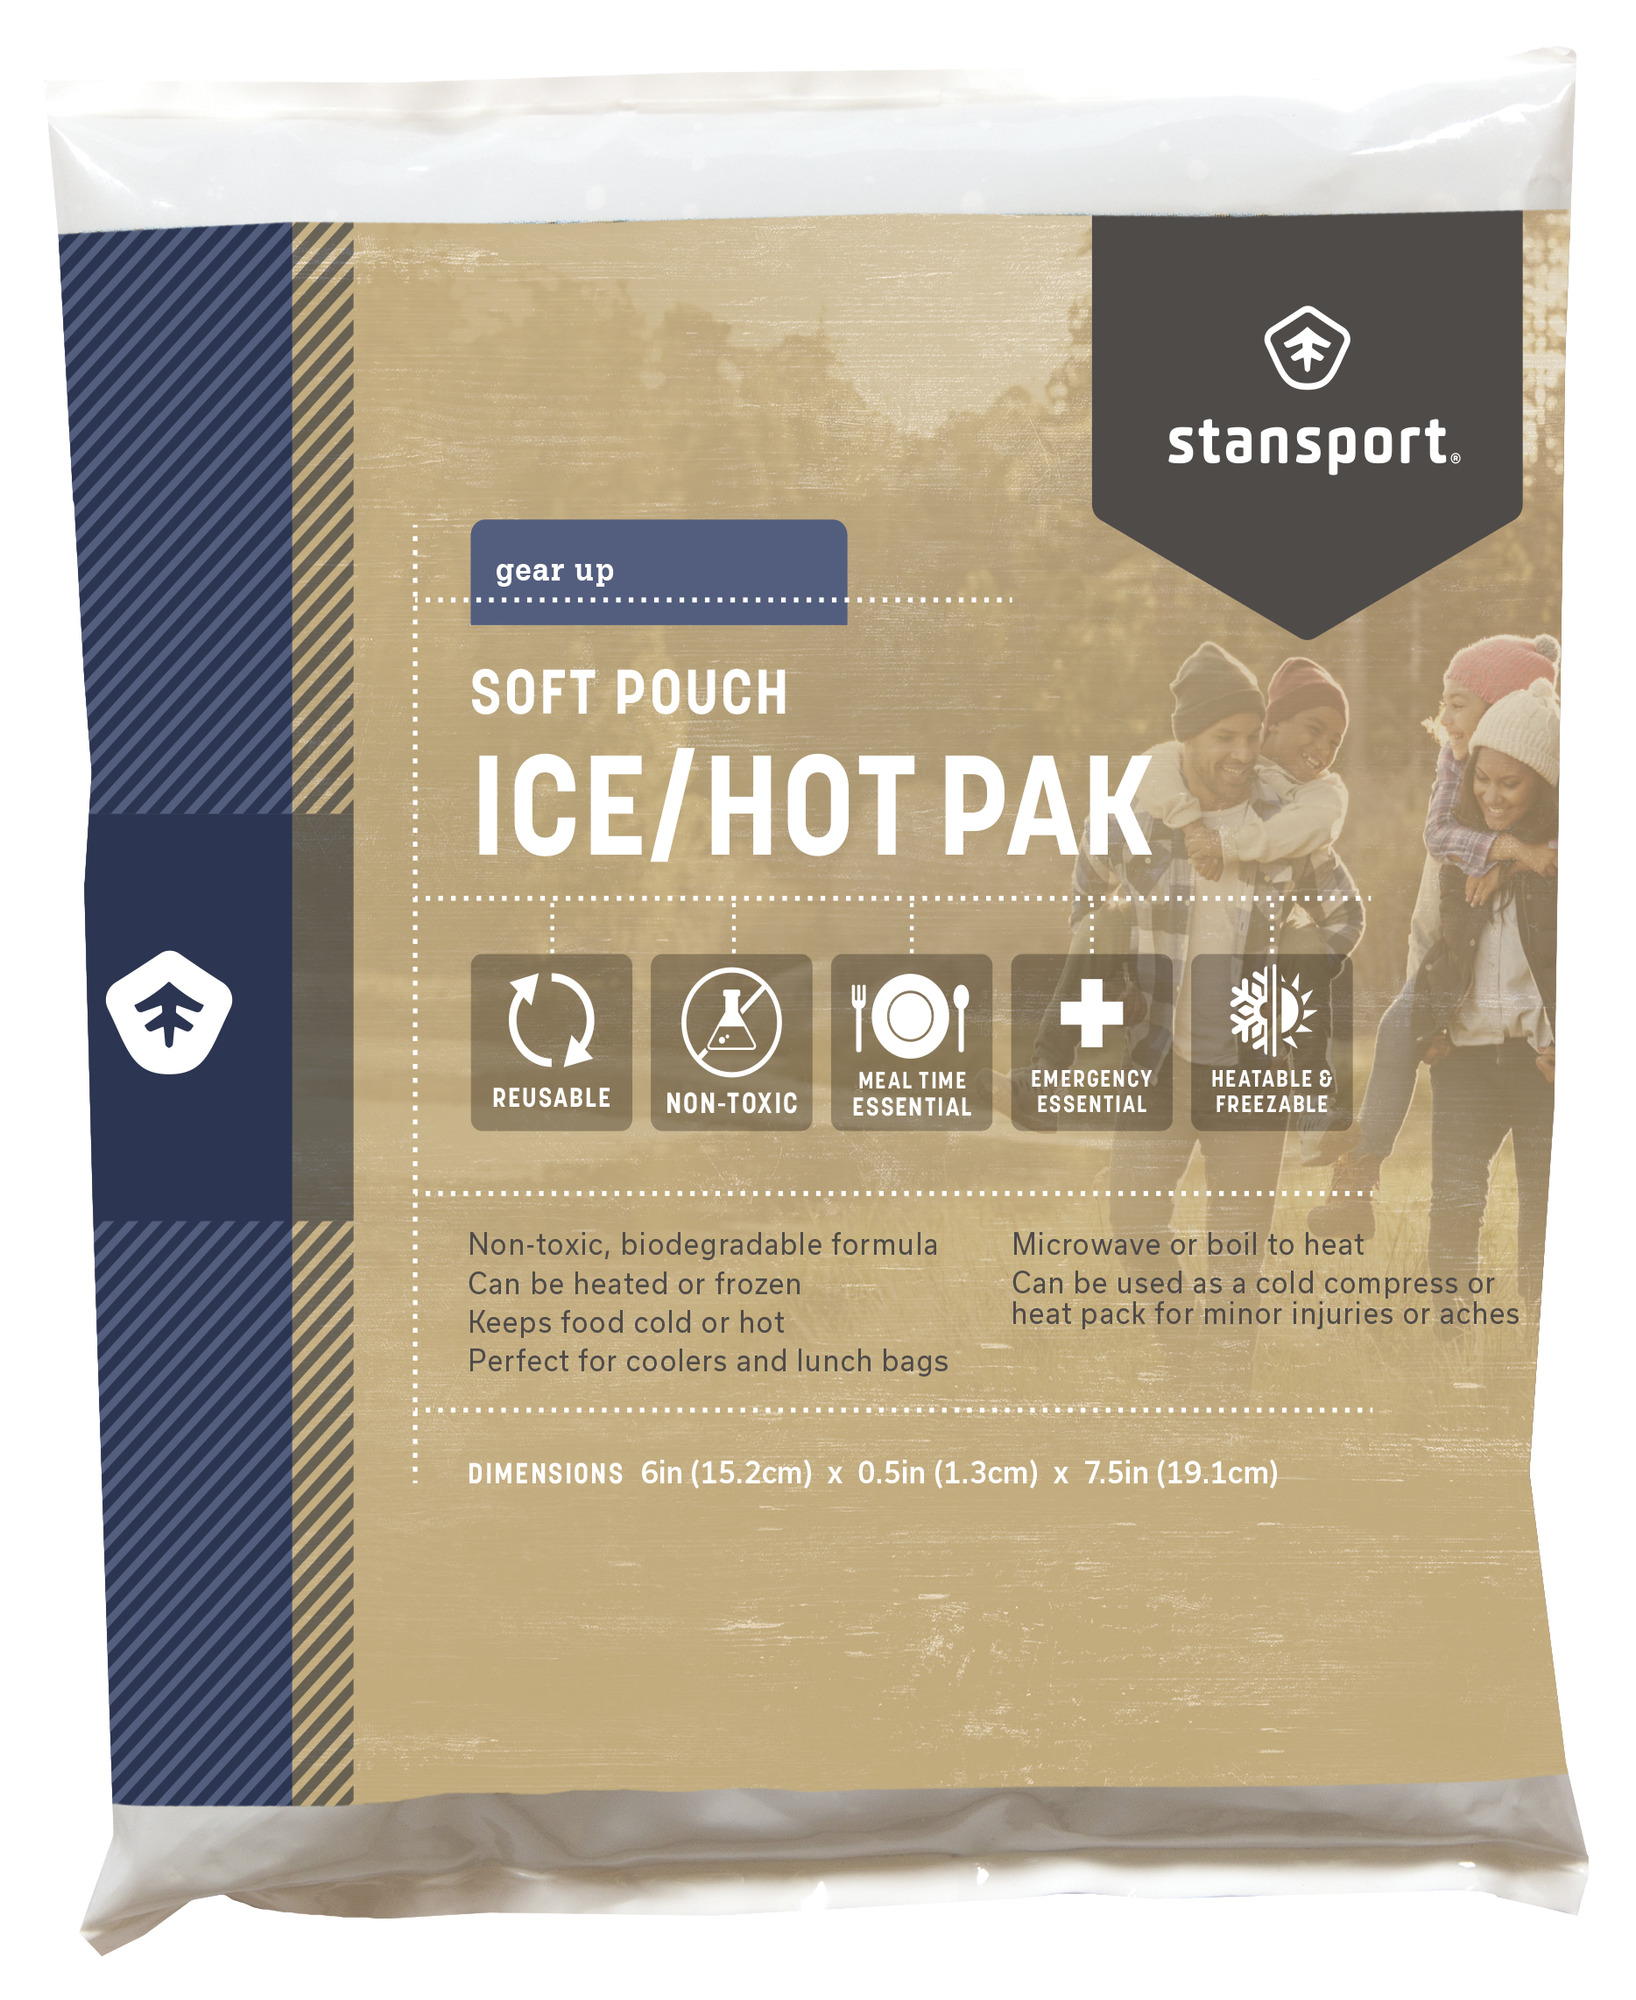 Stansport 74131 Soft Pouch Ice/Hot Pak